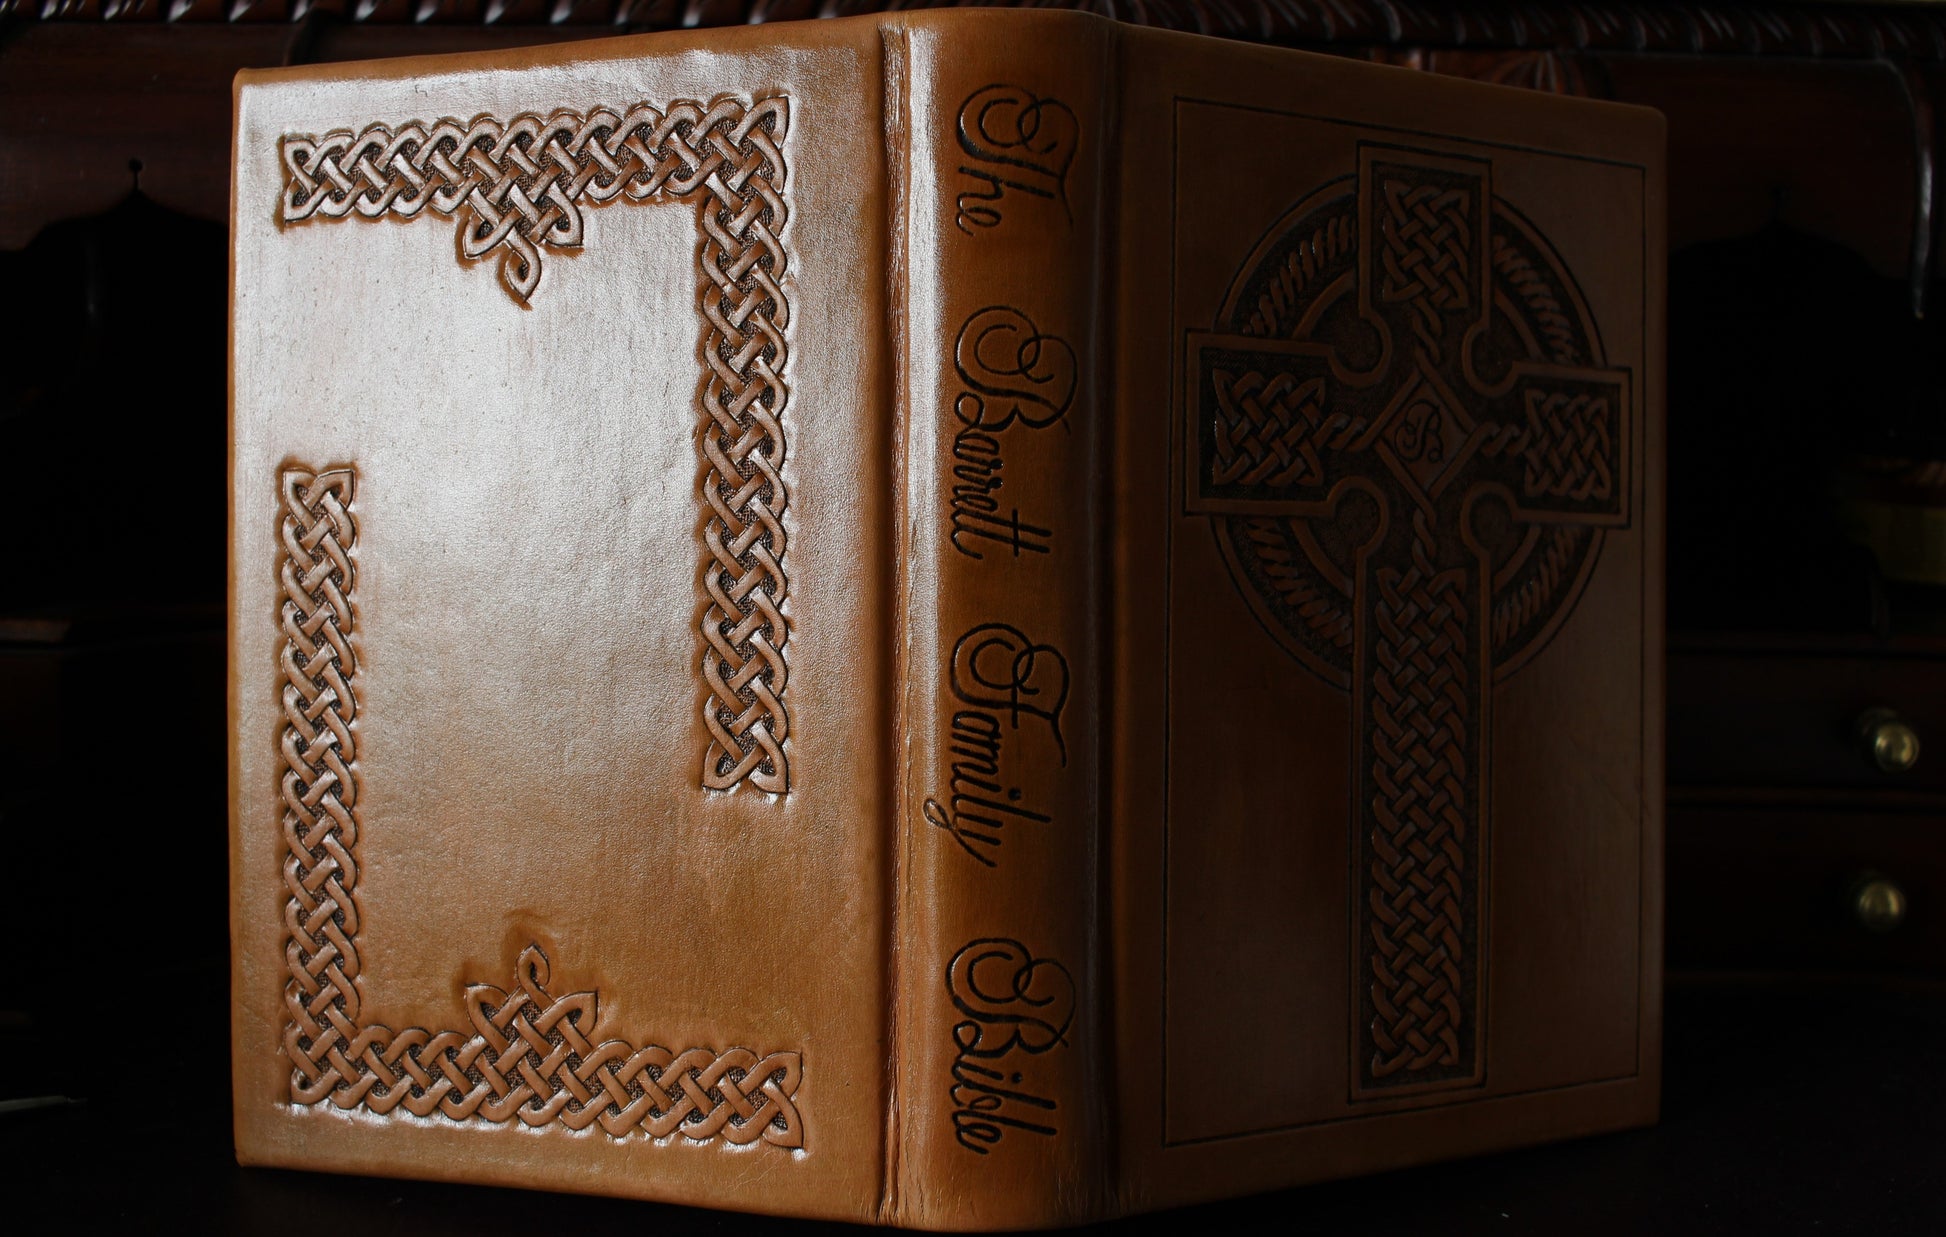 Celtic Cross and Knot Leather Bible Tooling Handmade